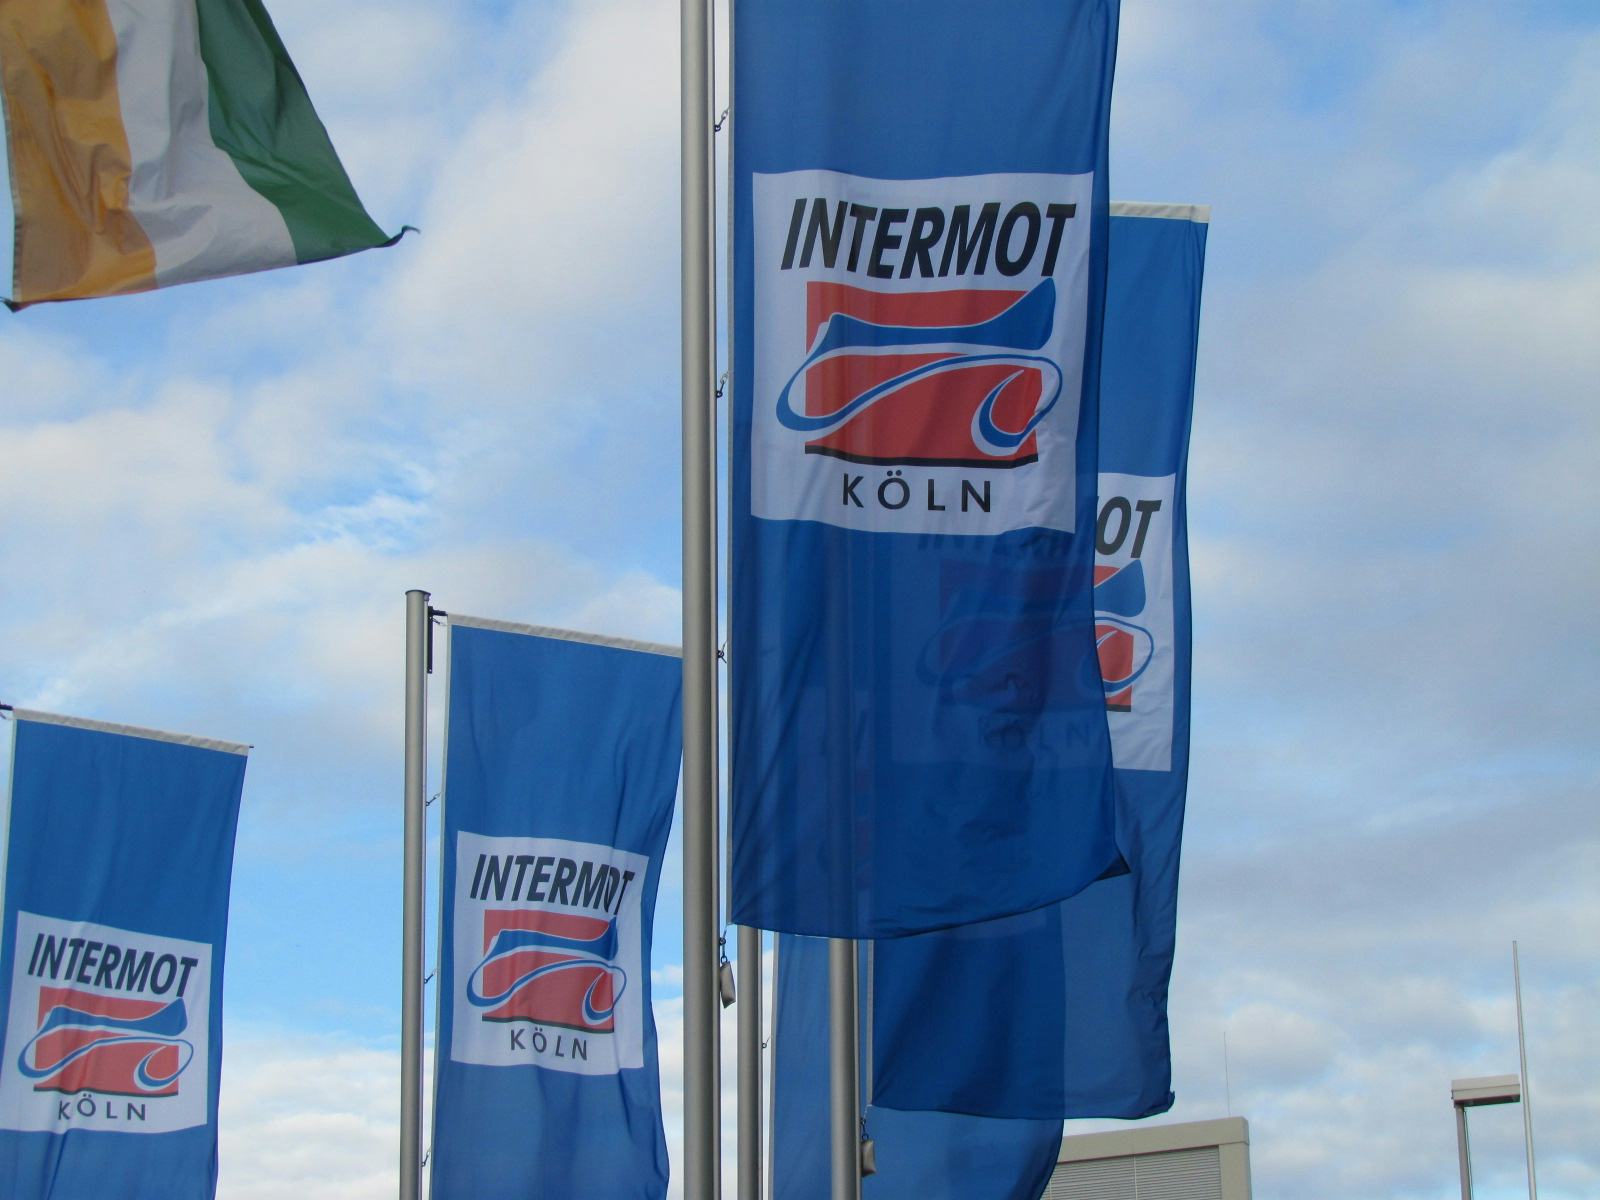 Intermot (taking place from 5 to 9 October, 2016 in Cologne) expands its engagement in South America. – Photo Bike Europe